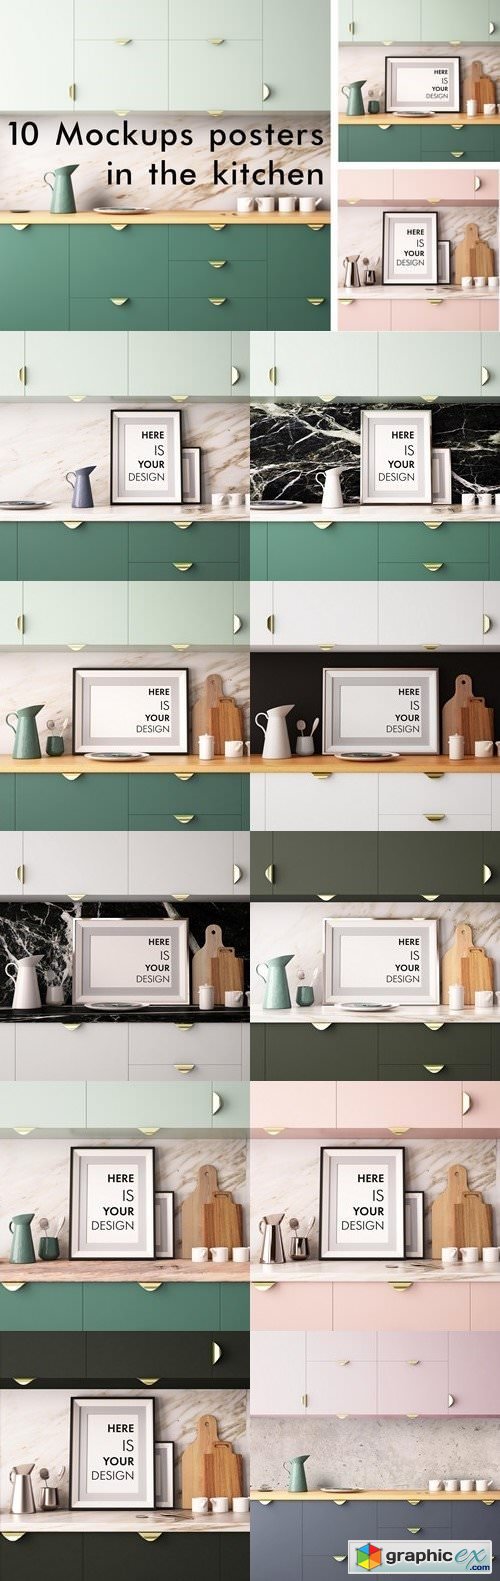 10 Mockups posters in the kitchen